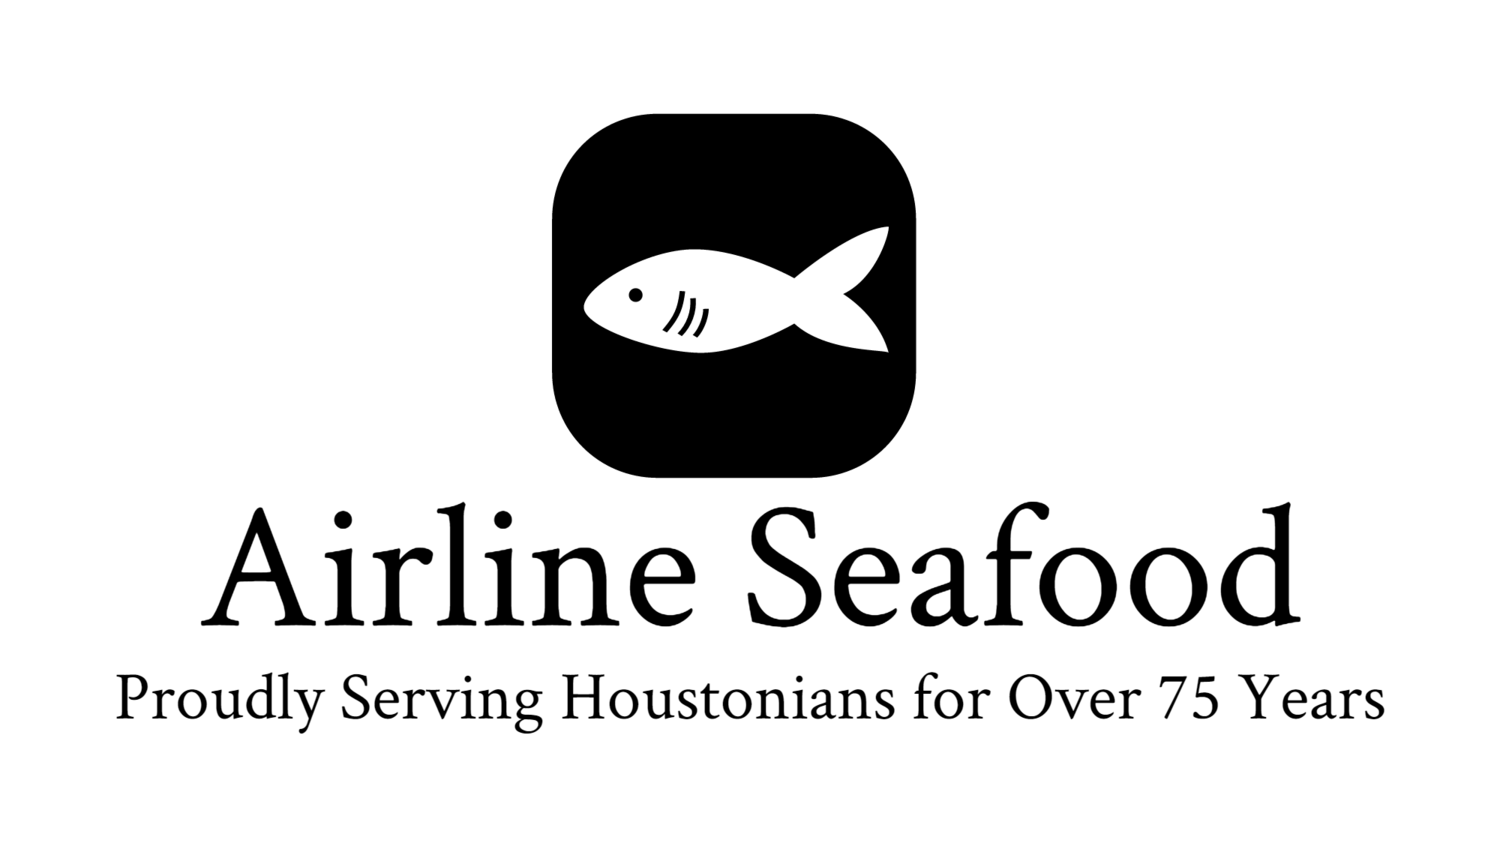 Airline with Fish Logo - Airline Seafood